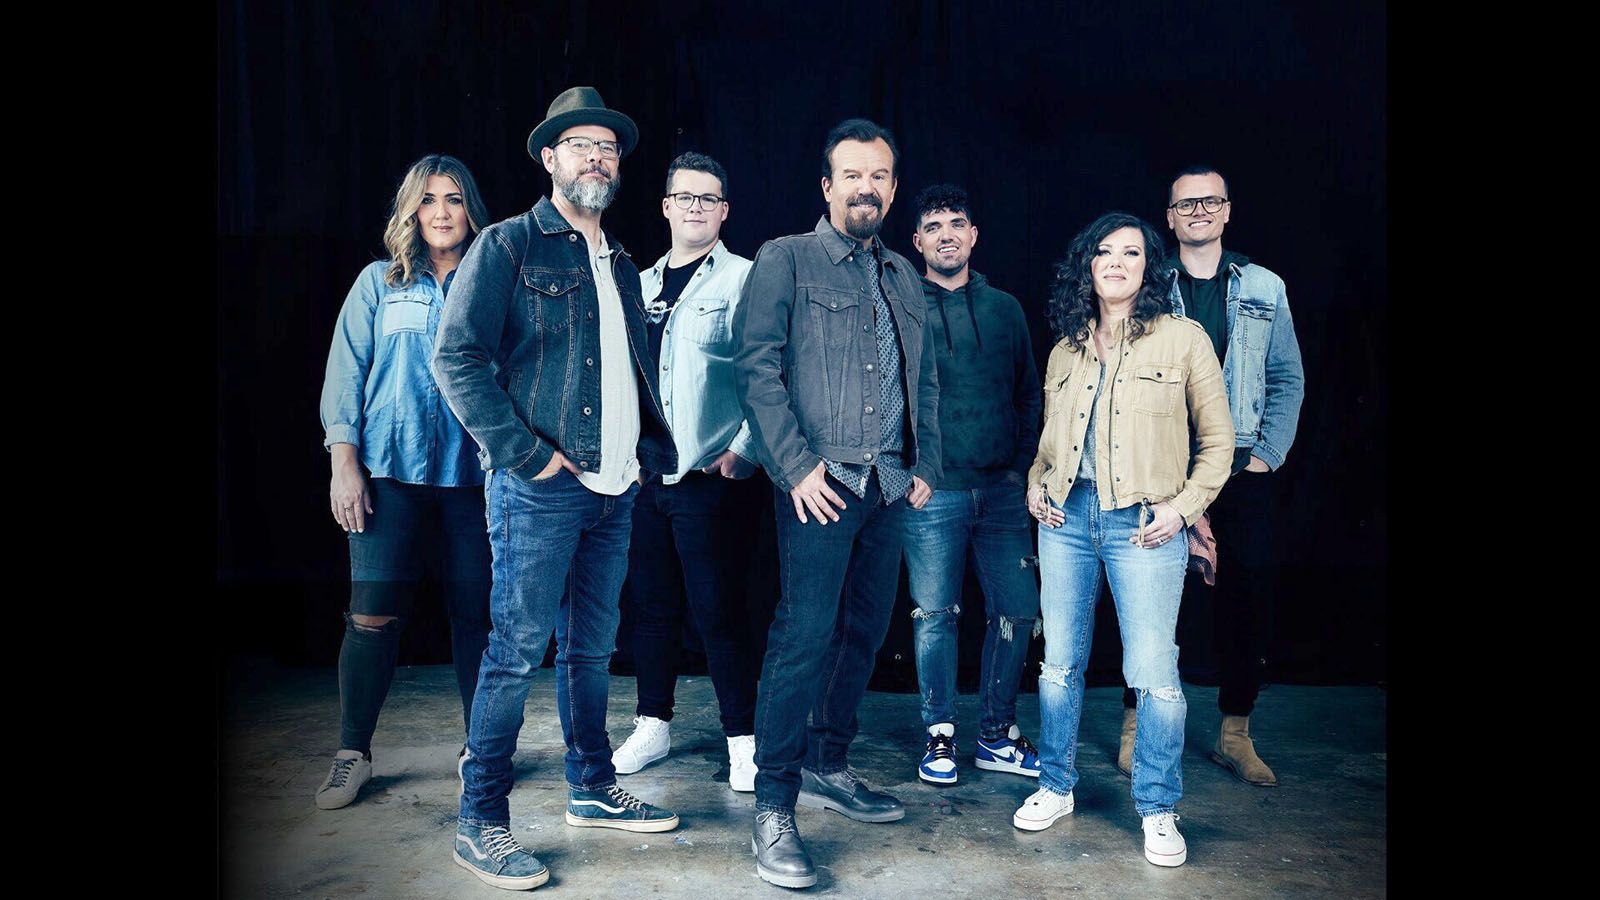 Casting Crowns will stop by Embassy Theatre on Friday, April 19.